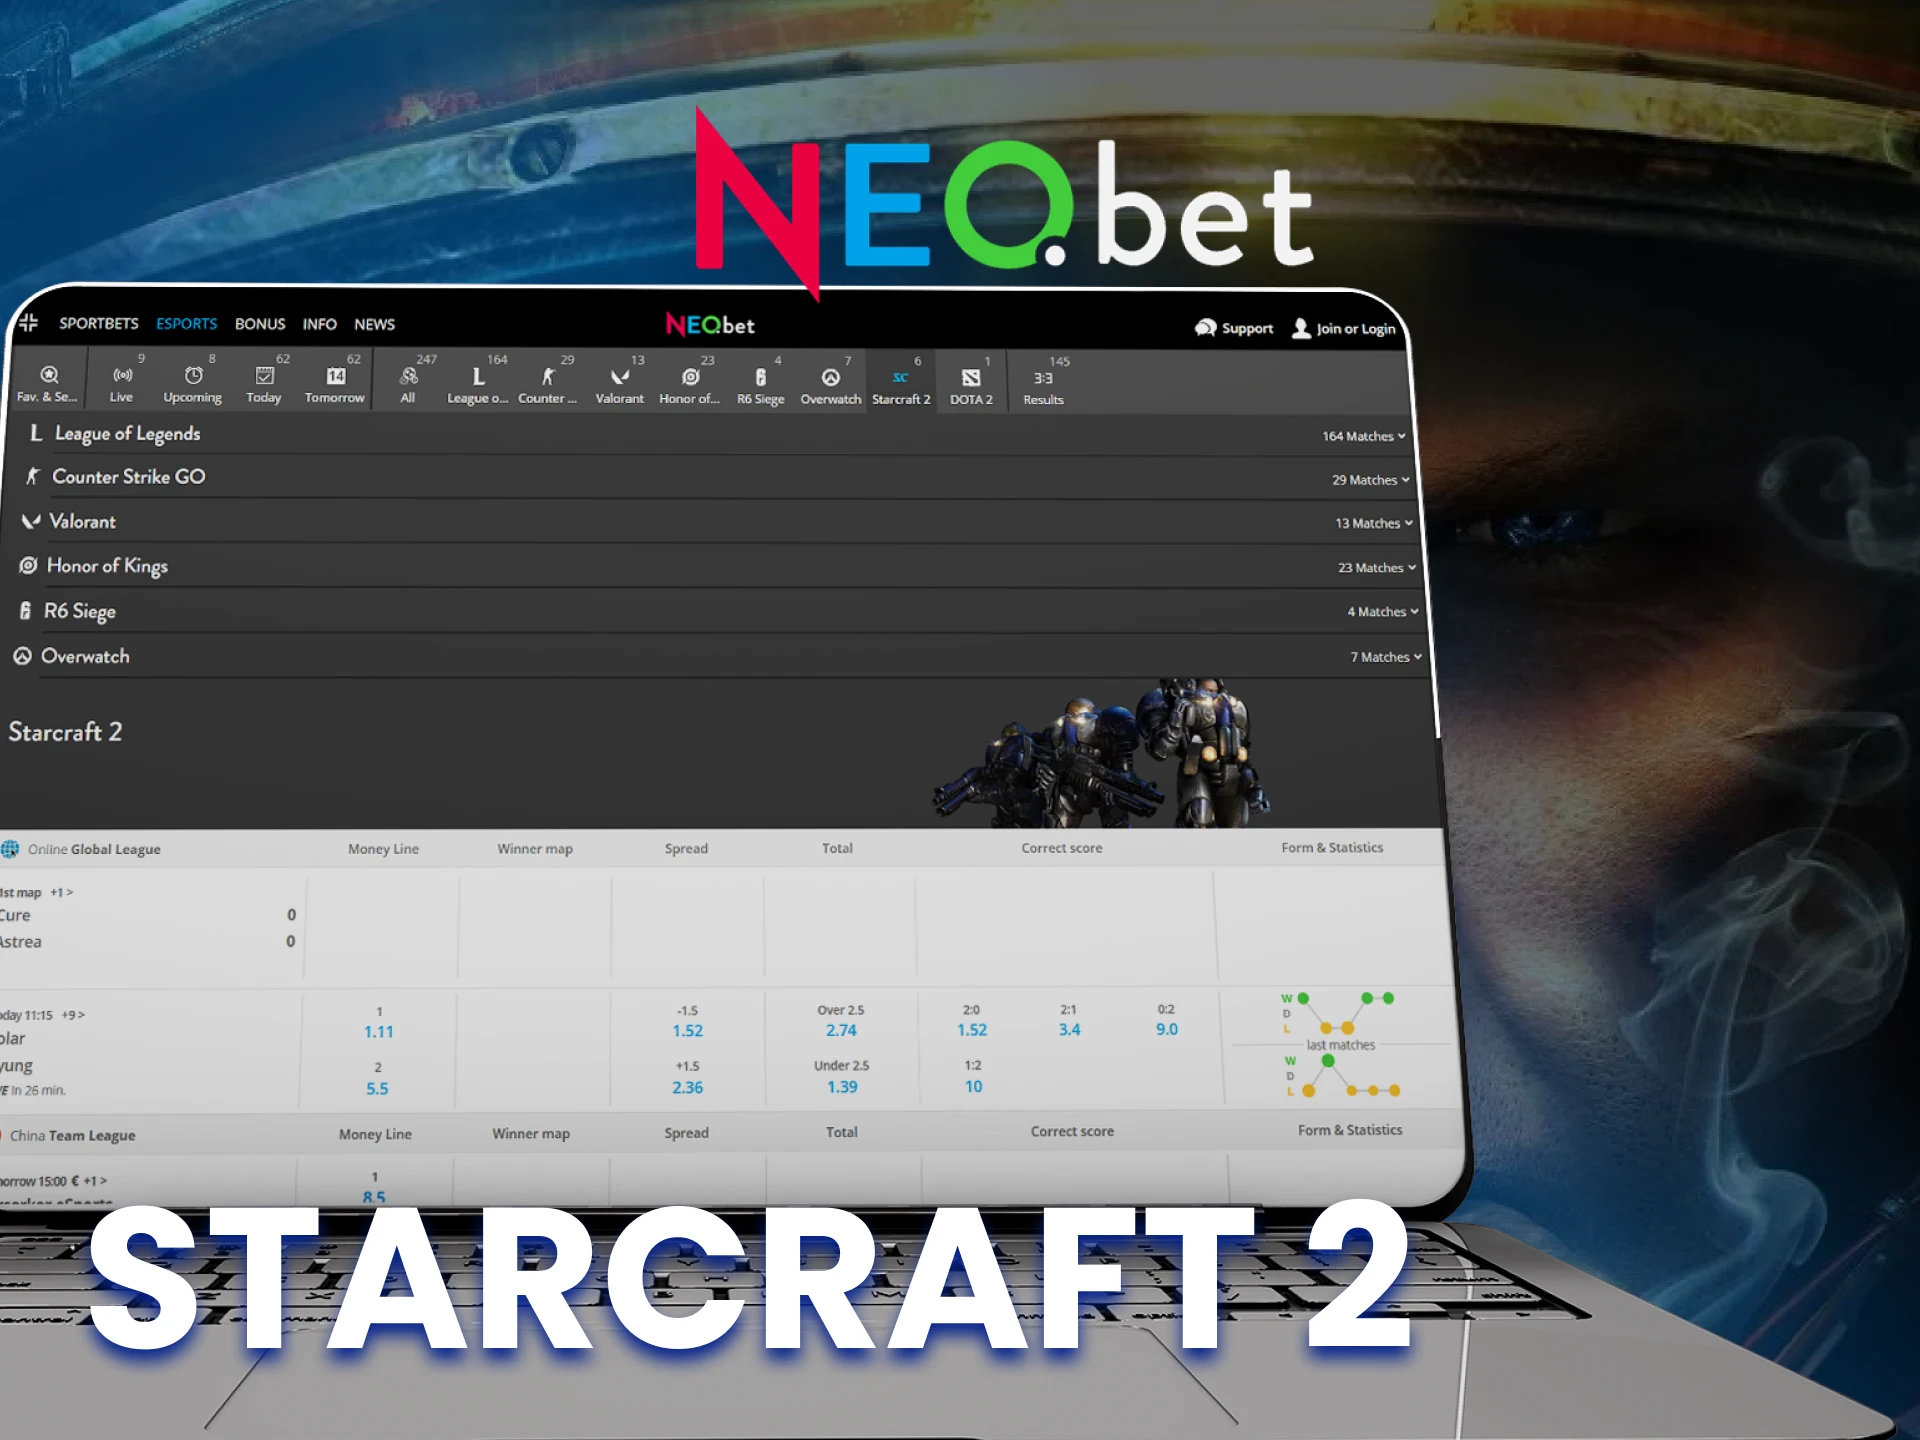 If you're a Starcraft 2 fan, bet on your favorite team winning at NEO.bet.